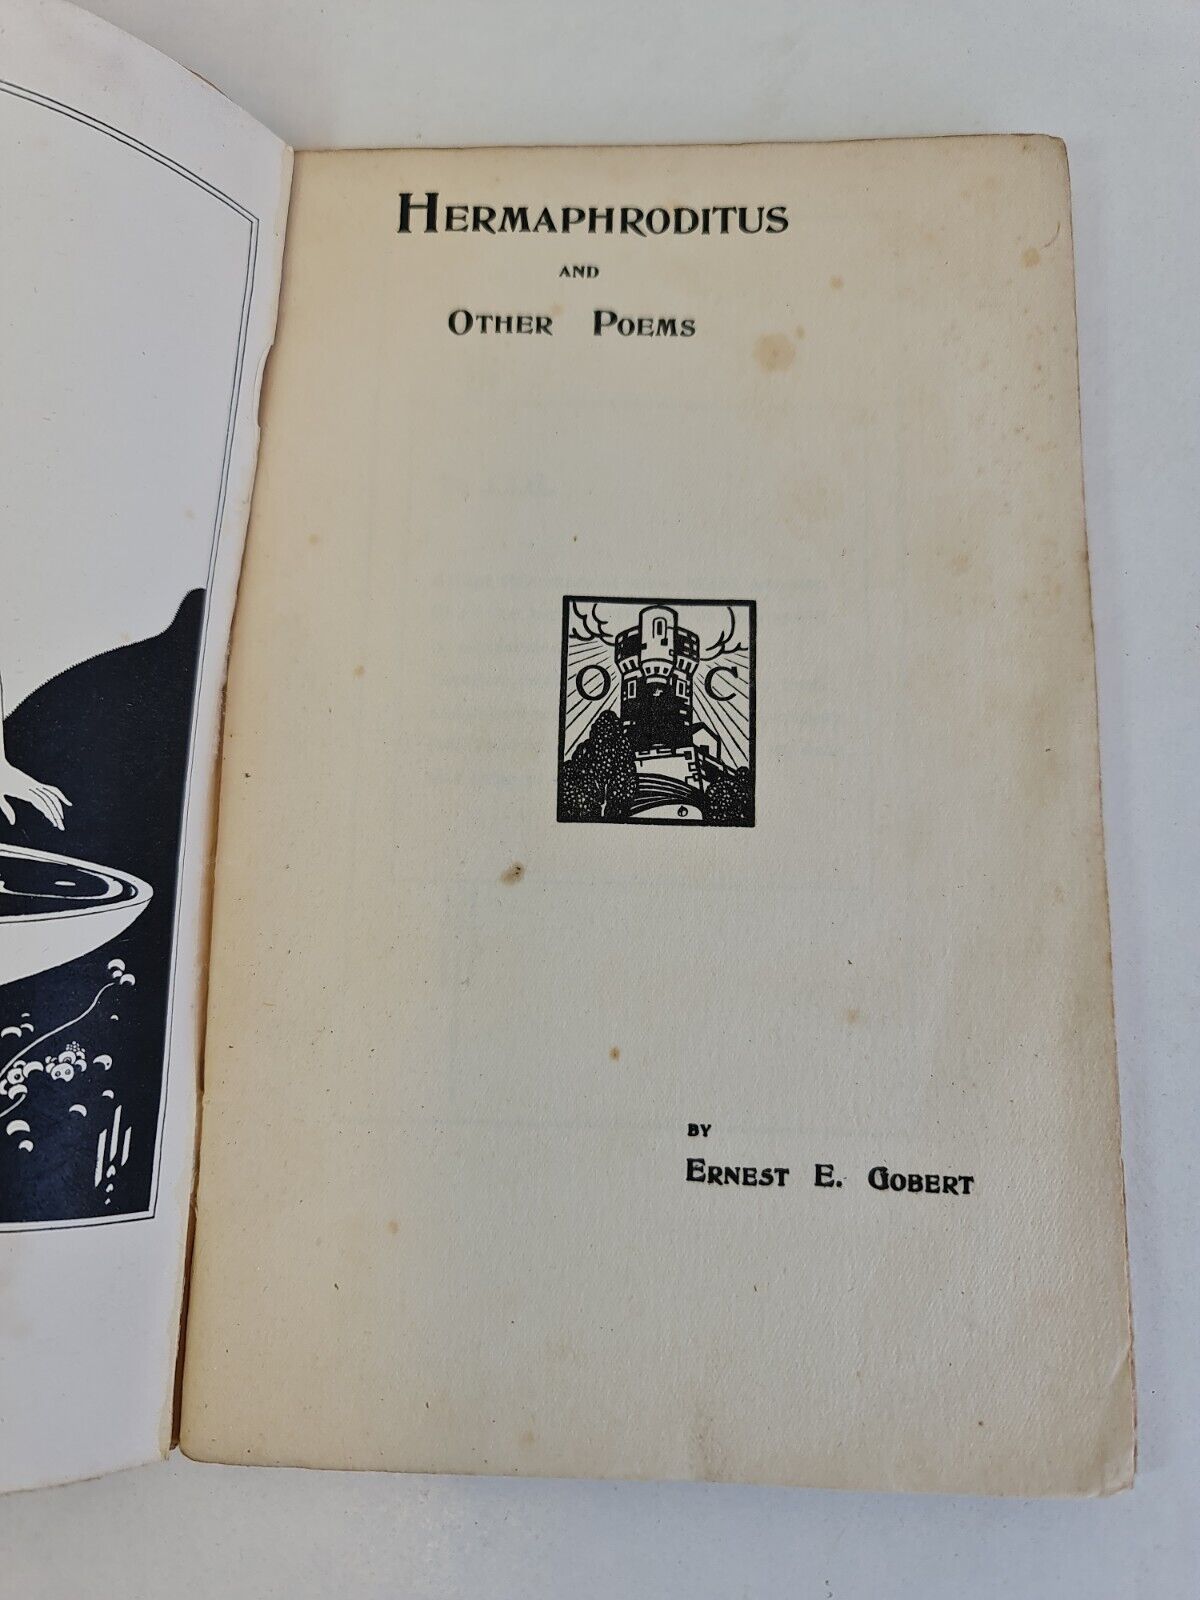 Hermaphroditus and Other Poems by Ernest Gobert